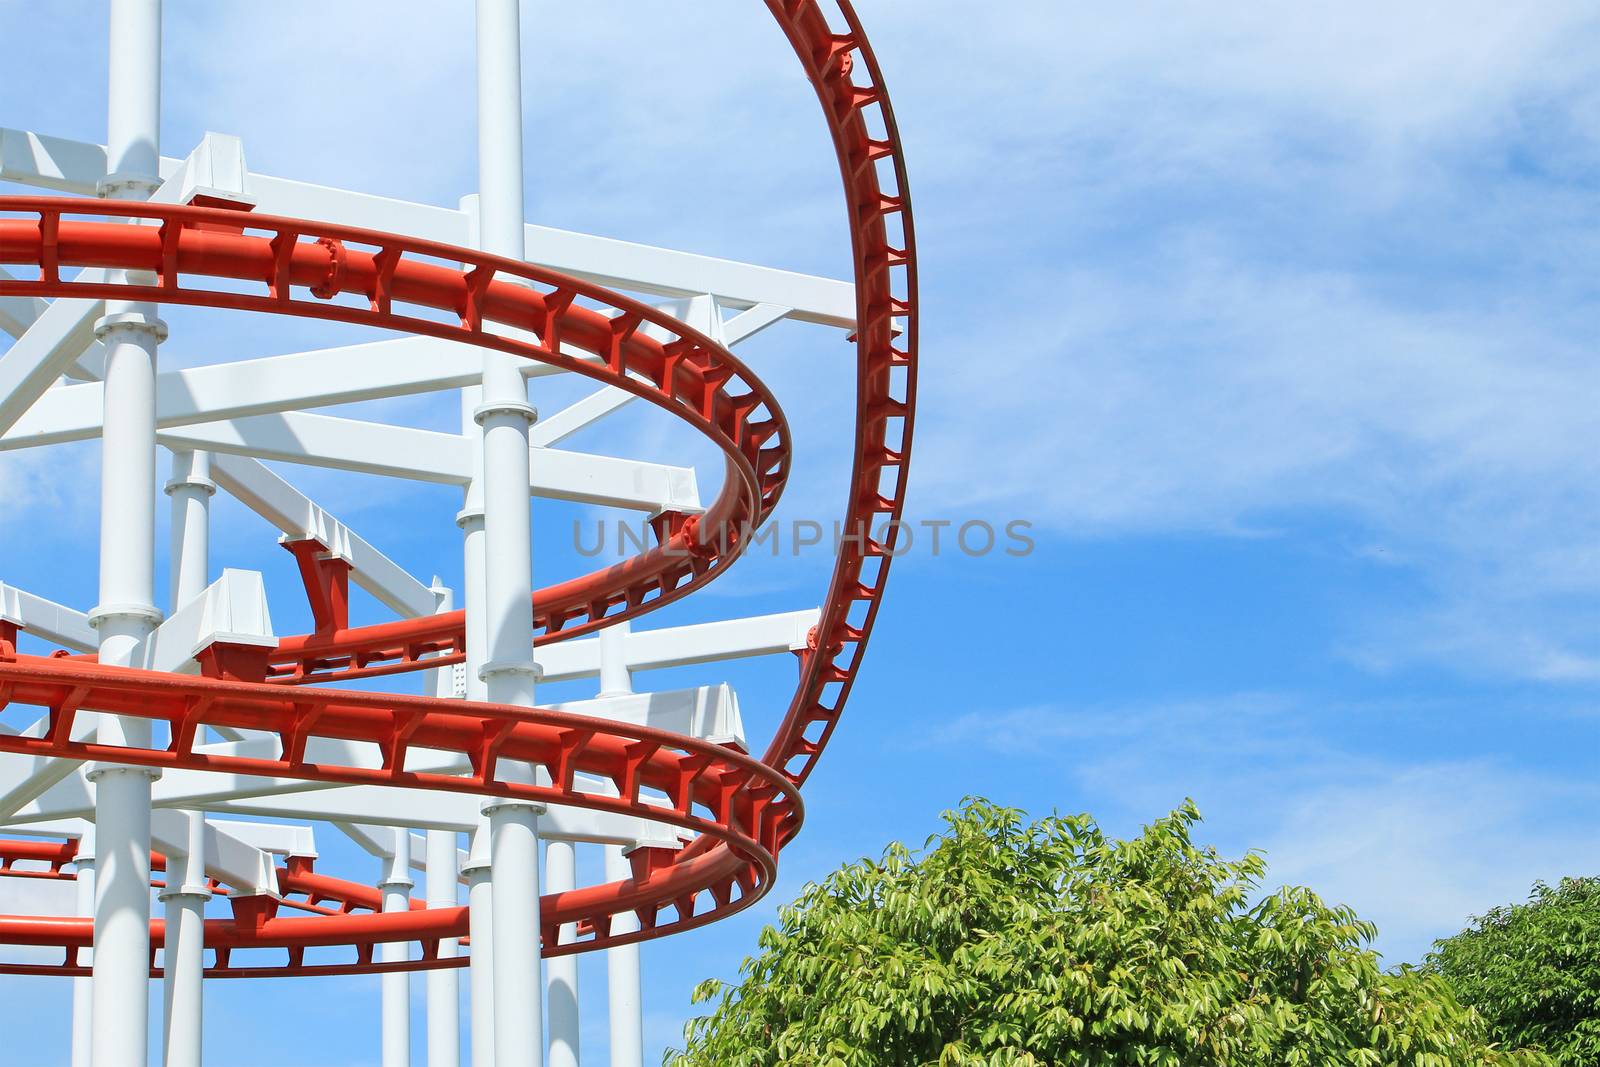 Roller coaster by foto76